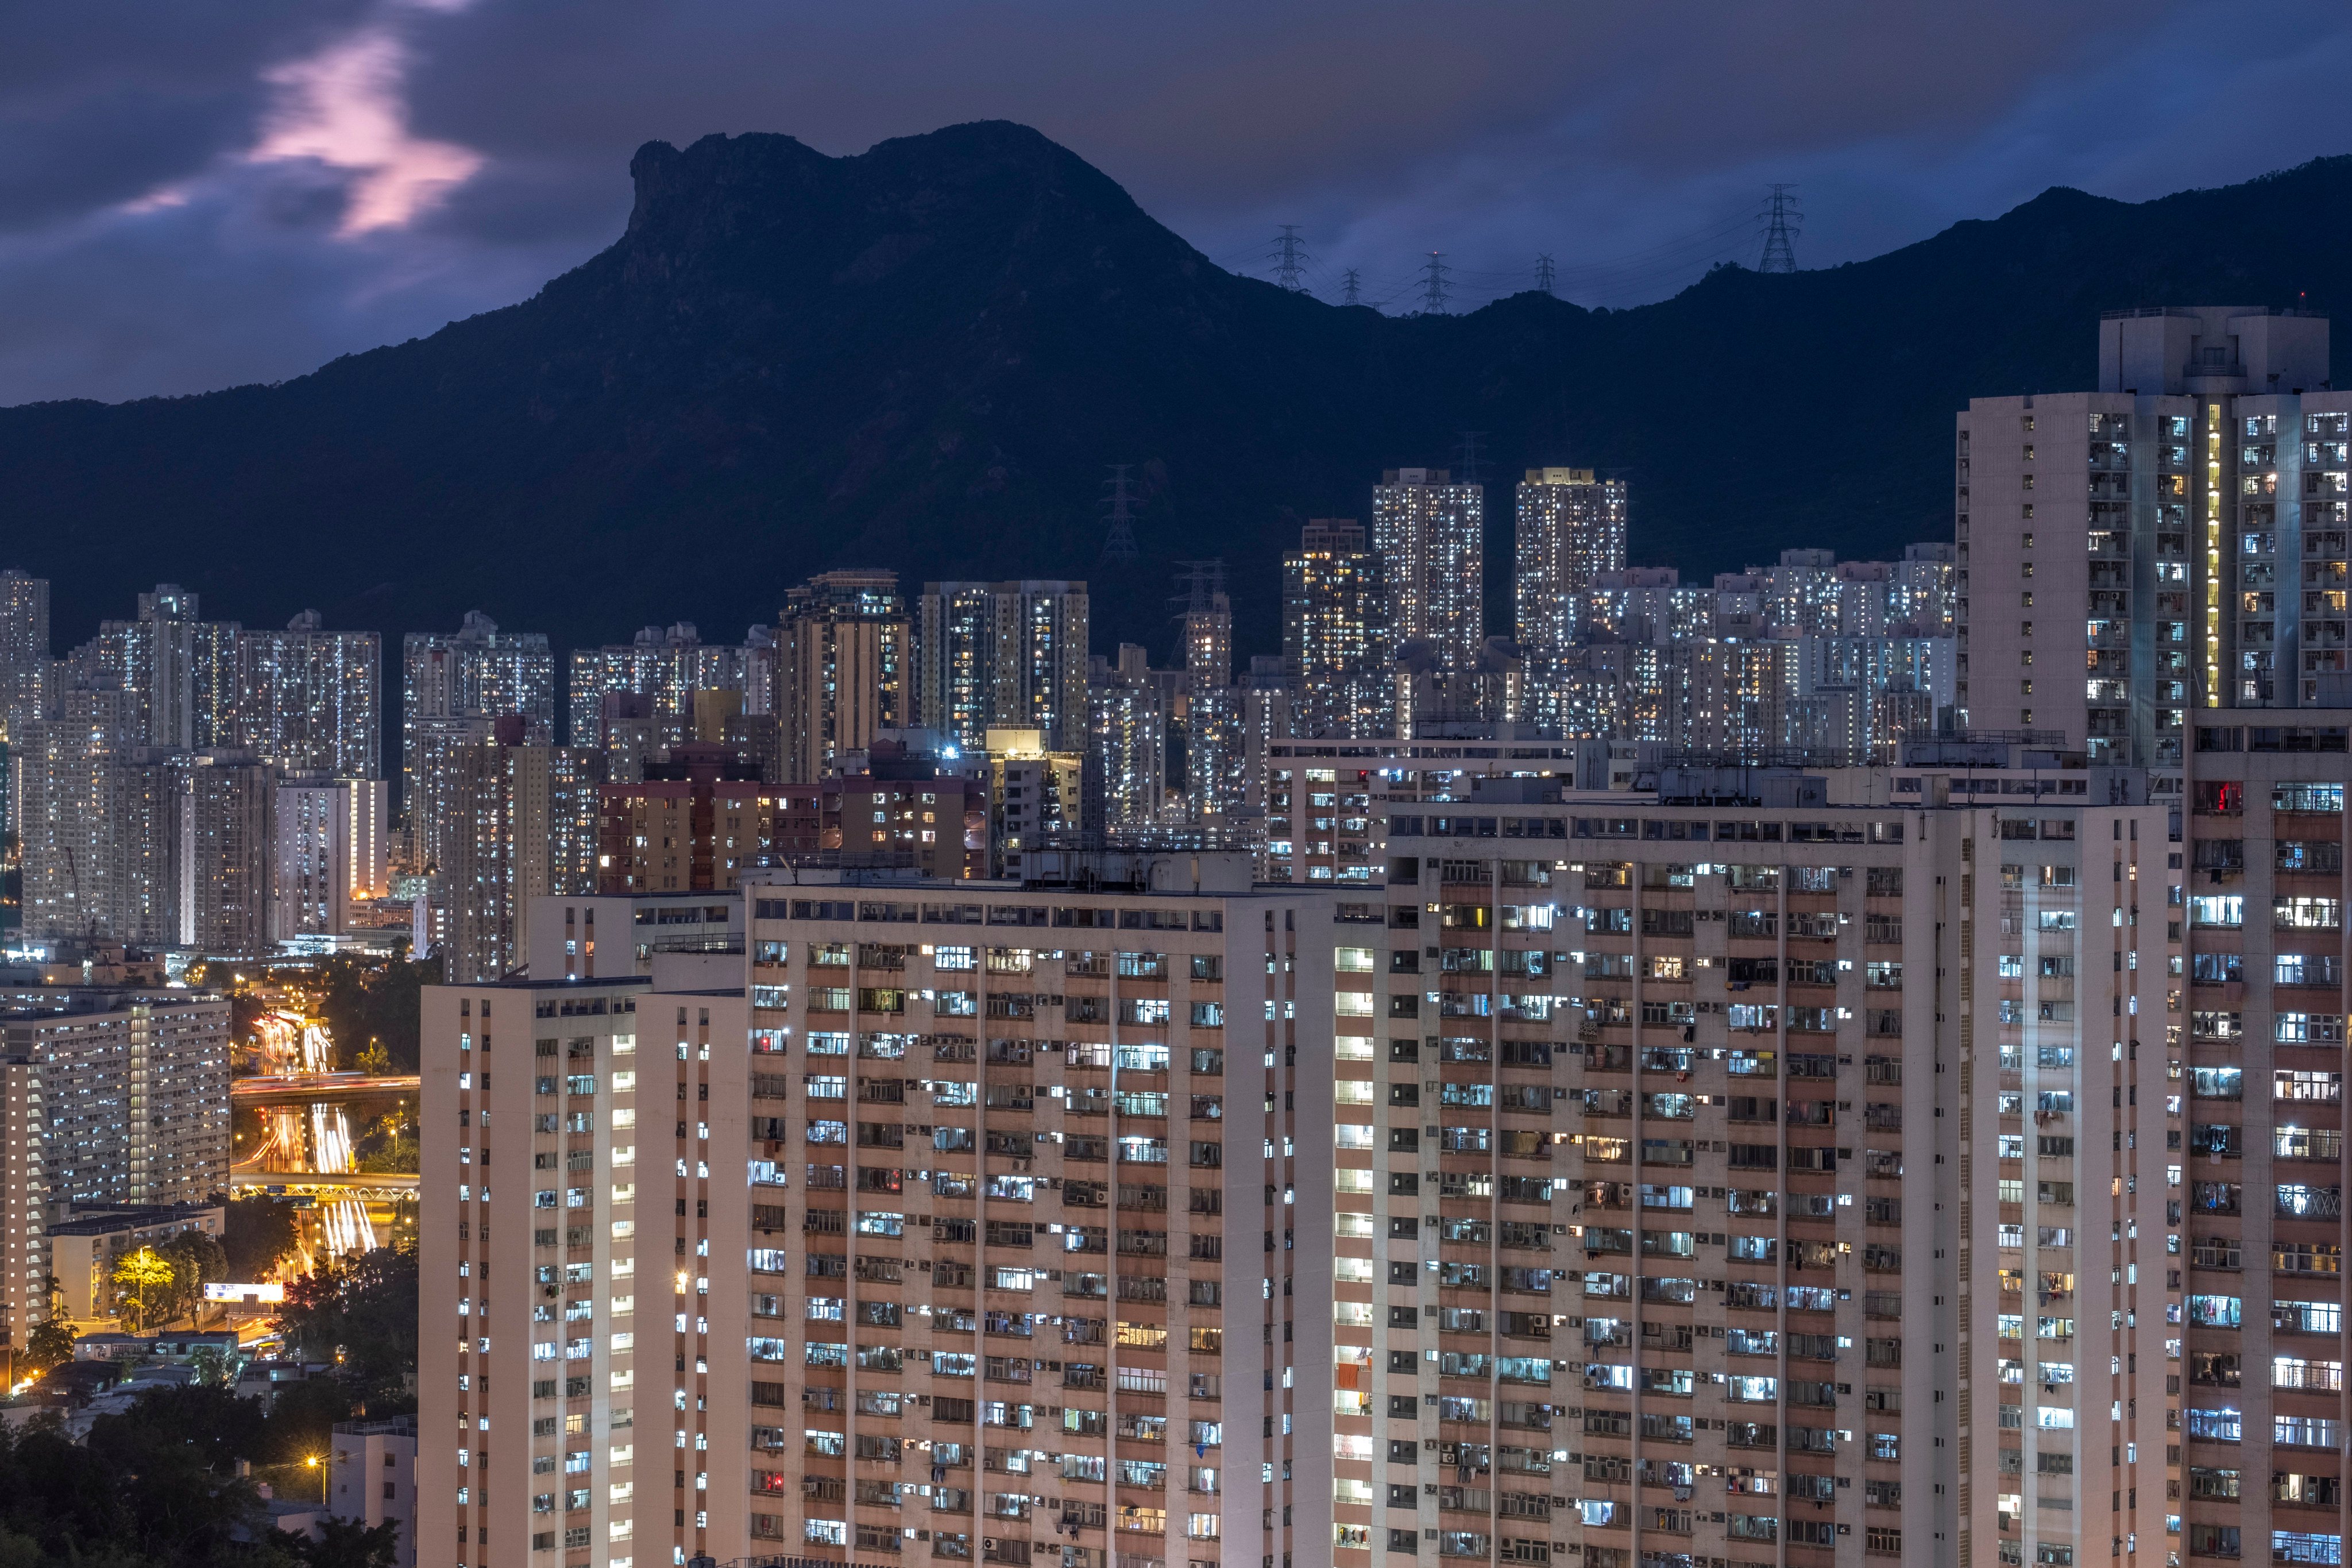 Lion Rock looms over the night skyline in Kowloon. Photo: Sun Yeung